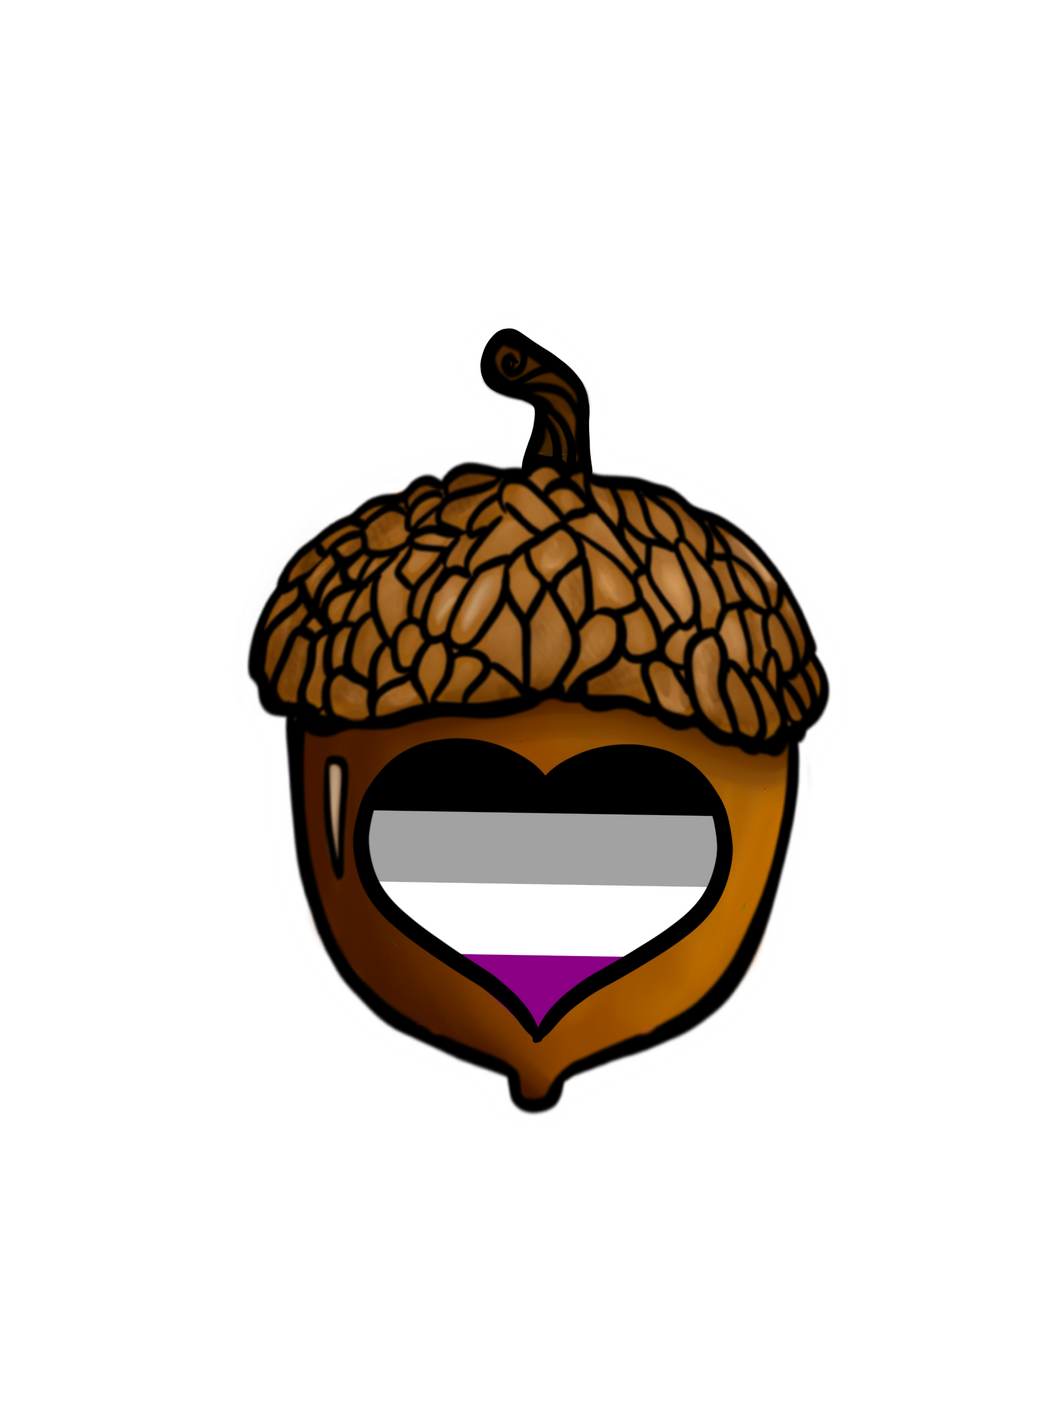 Asexual Gaycorn Sticker